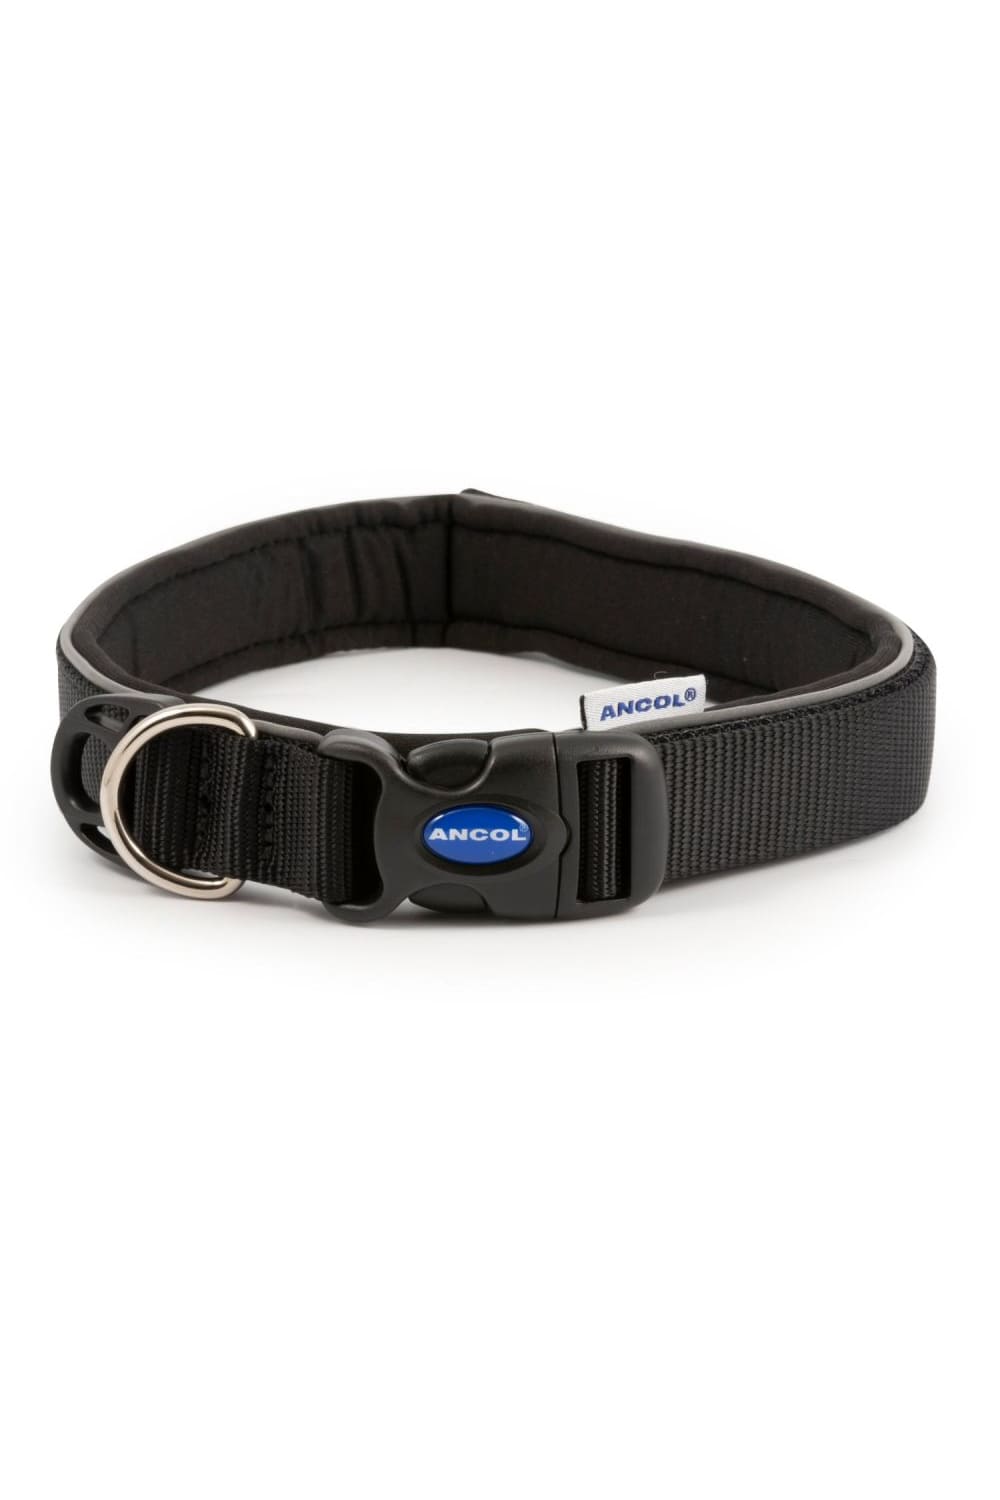 Ancol Extreme Dog Collar (Black) (18.11in - 21.26in)